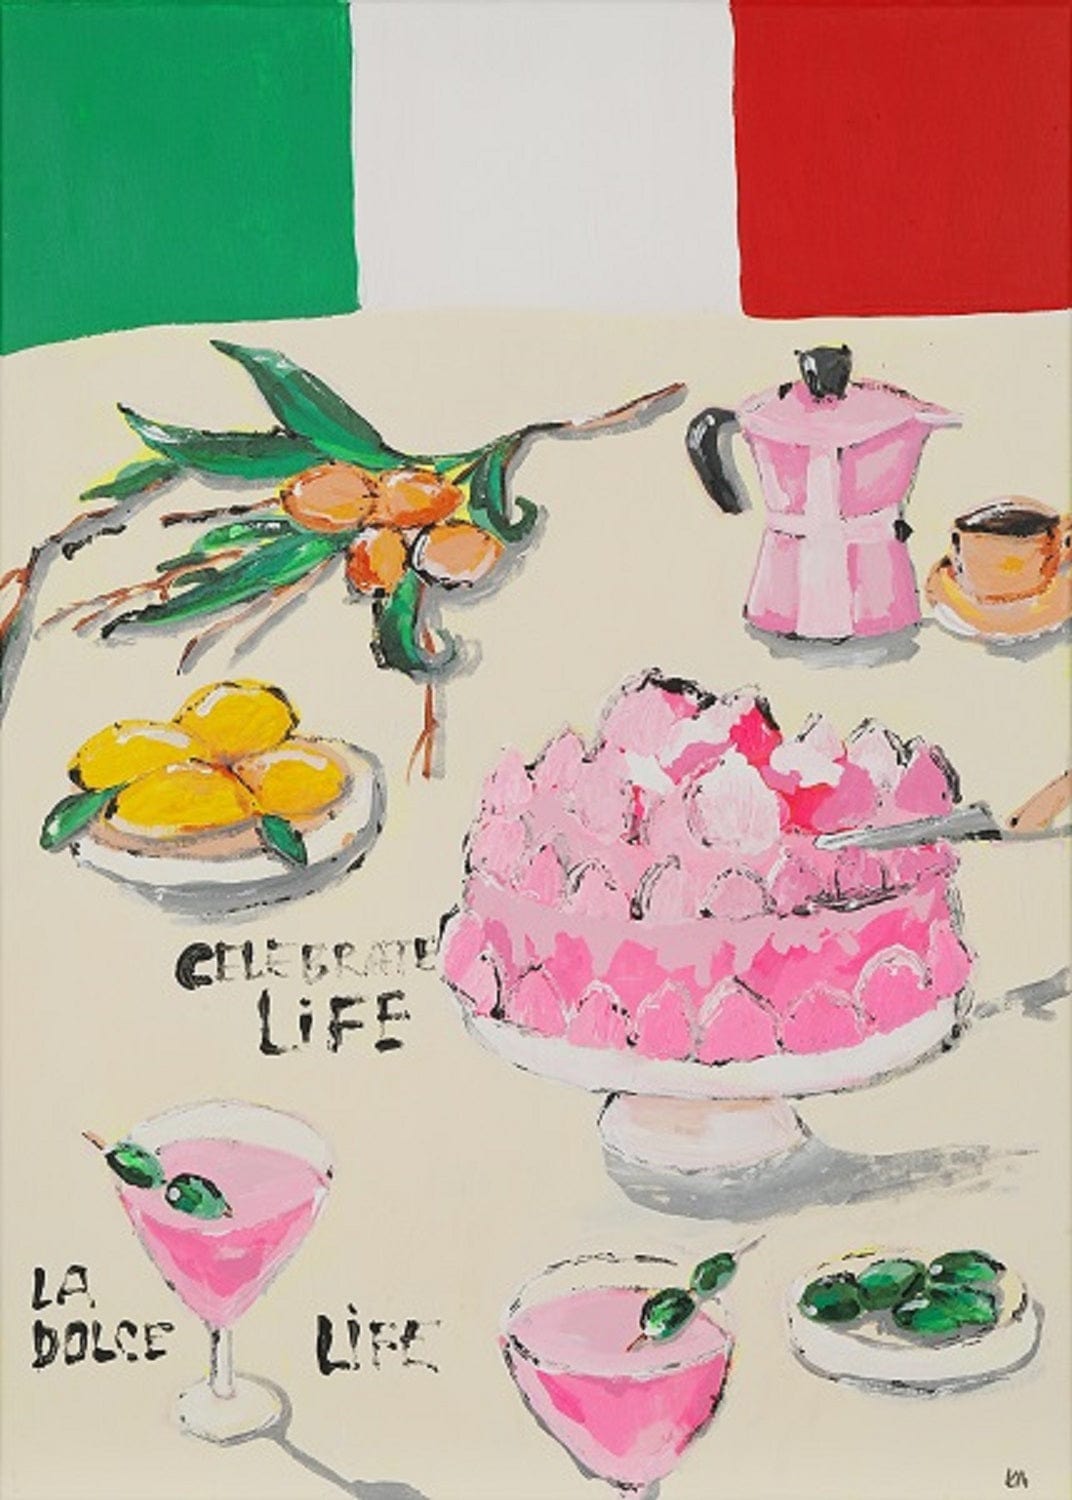 La Dolce Life - Limited Edition Print